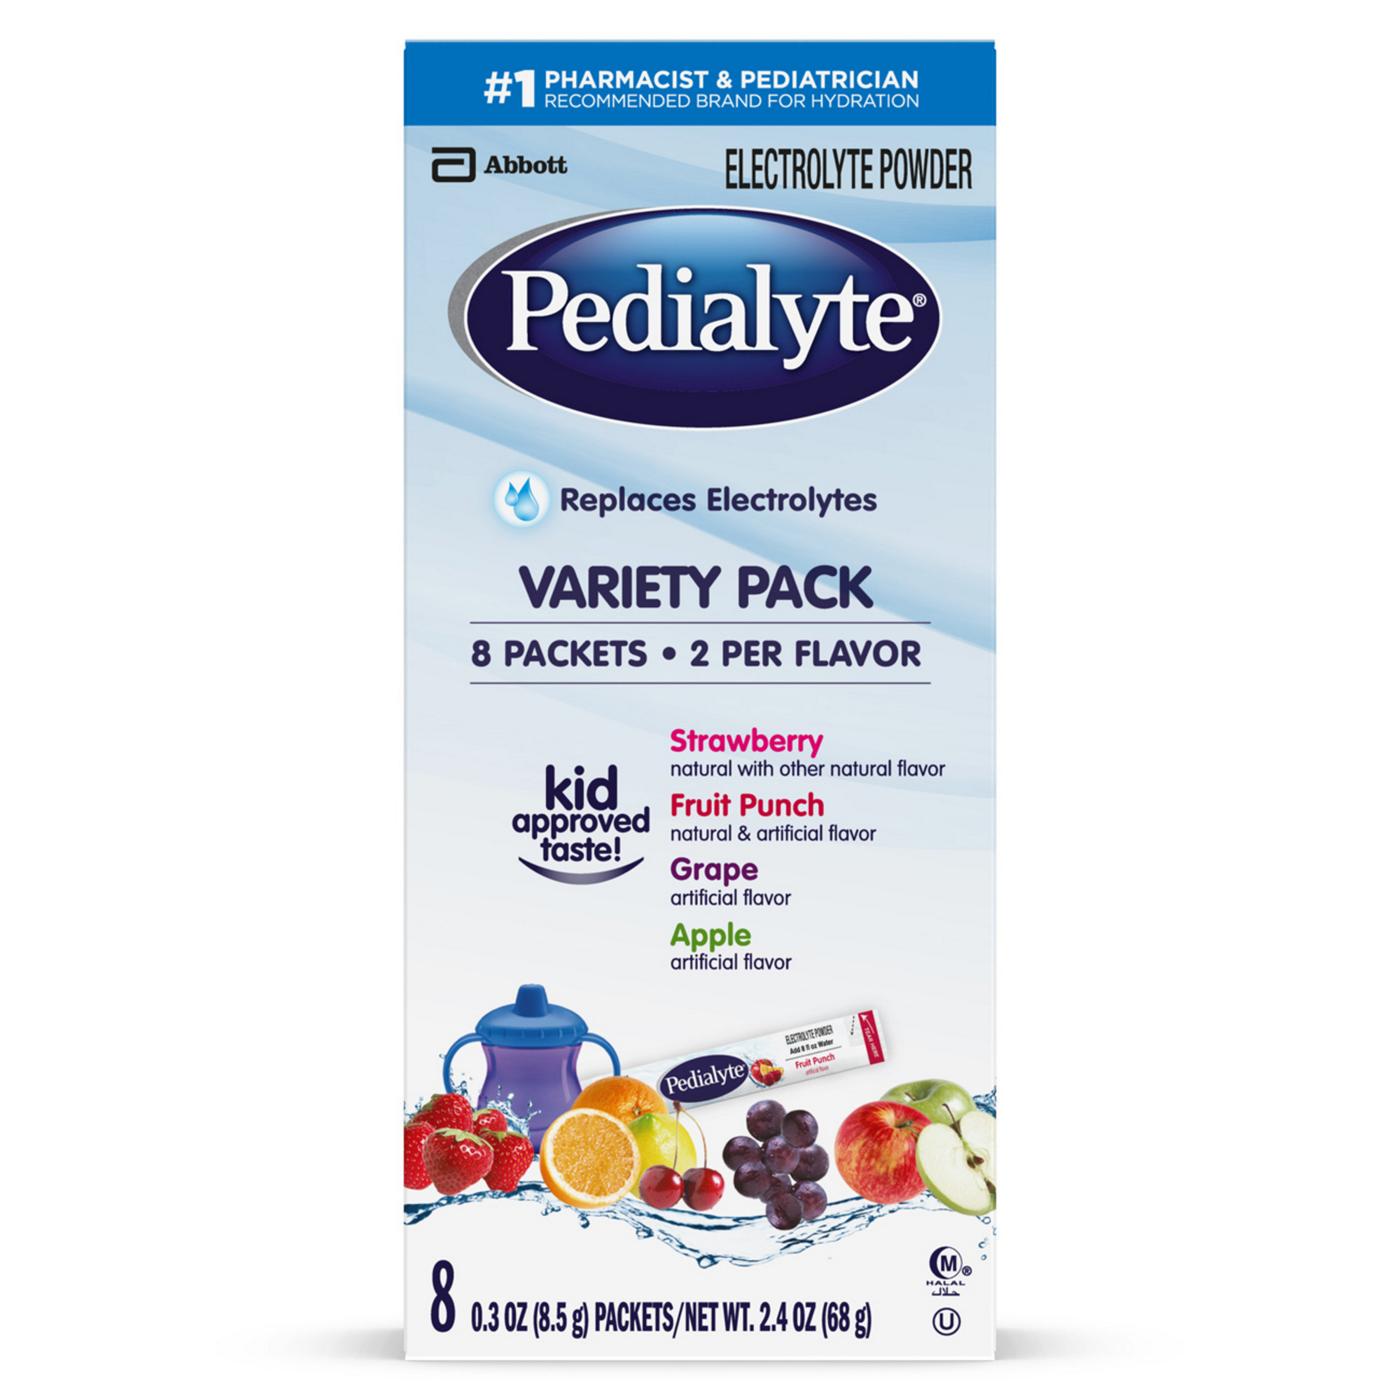 Pedialyte Electrolyte Powder Packets - Variety Pack; image 1 of 6